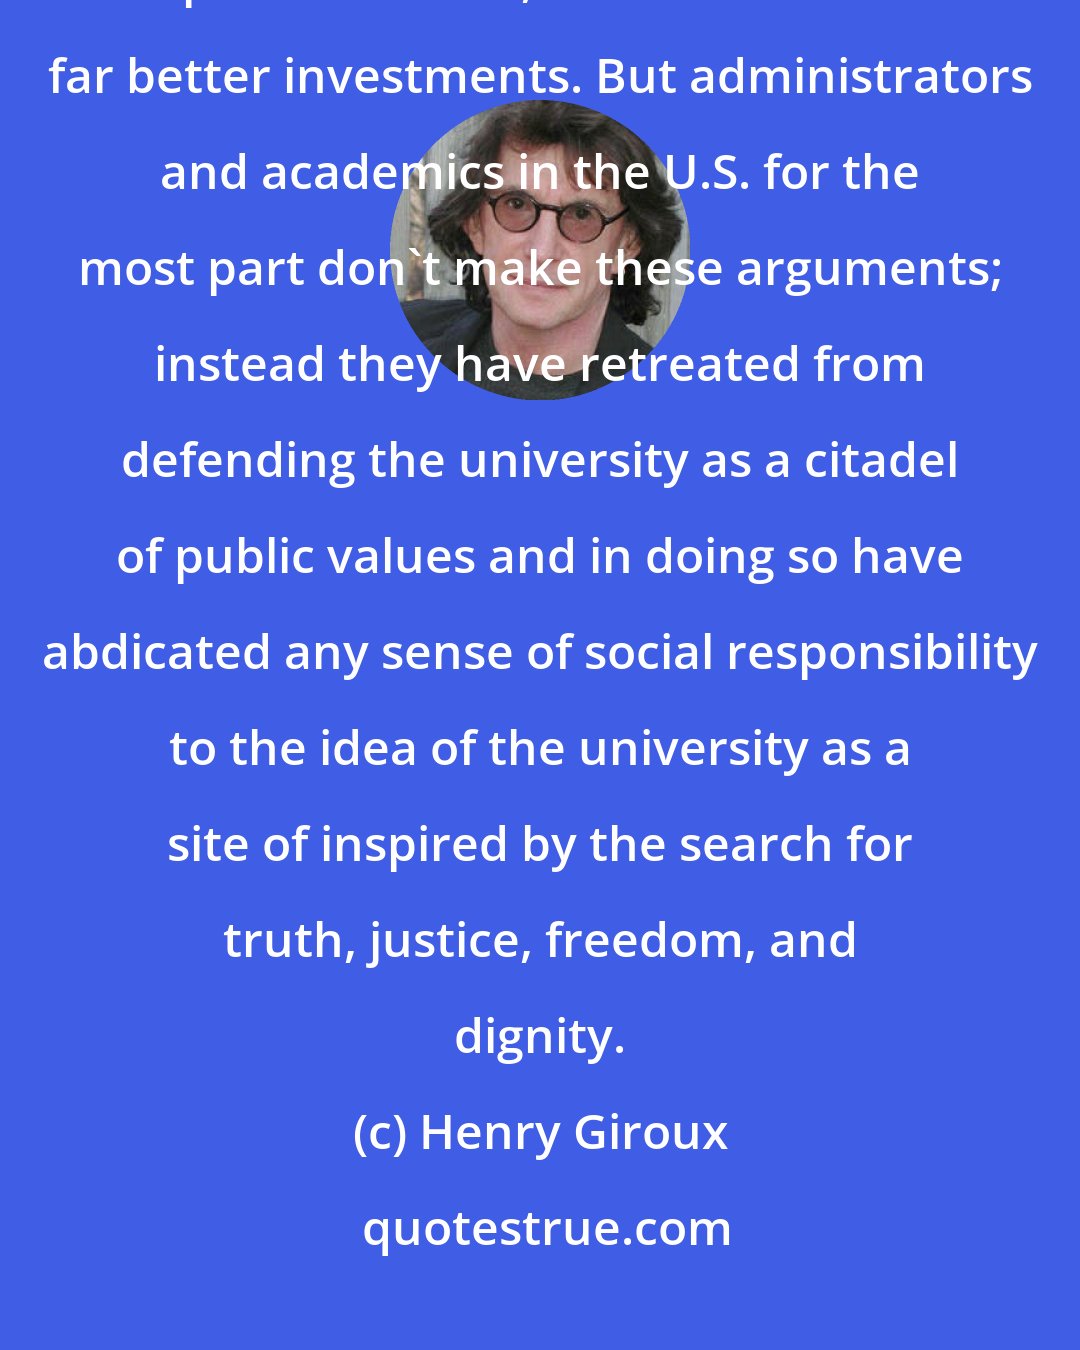 Henry Giroux: If the government were to invest that money in higher education and public services, these would be far better investments. But administrators and academics in the U.S. for the most part don't make these arguments; instead they have retreated from defending the university as a citadel of public values and in doing so have abdicated any sense of social responsibility to the idea of the university as a site of inspired by the search for truth, justice, freedom, and dignity.